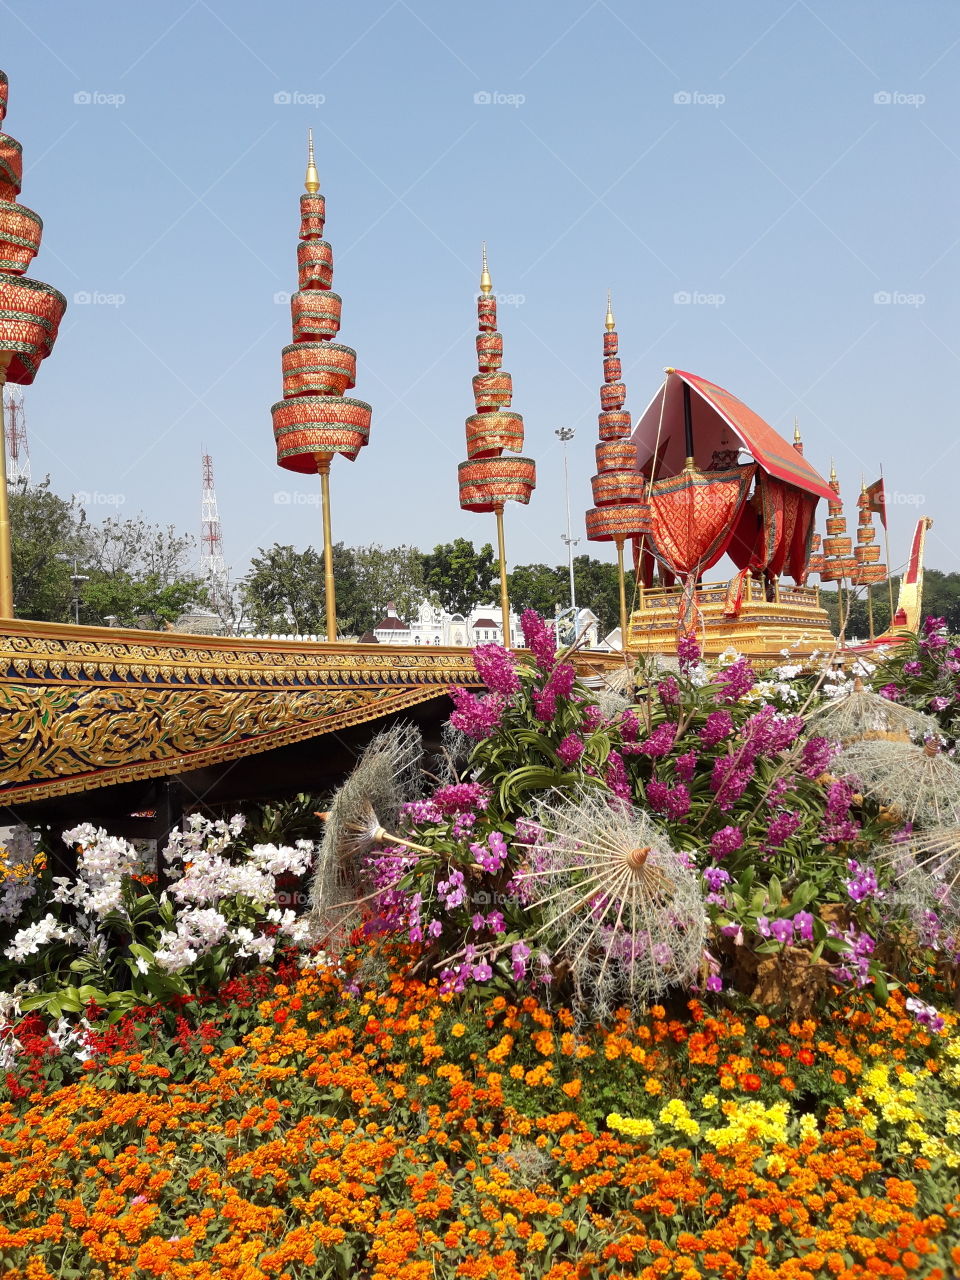 from the front part to the end part of "Royal Barge Suphannahong Model" and the beauty of flower decoration beside the barge.